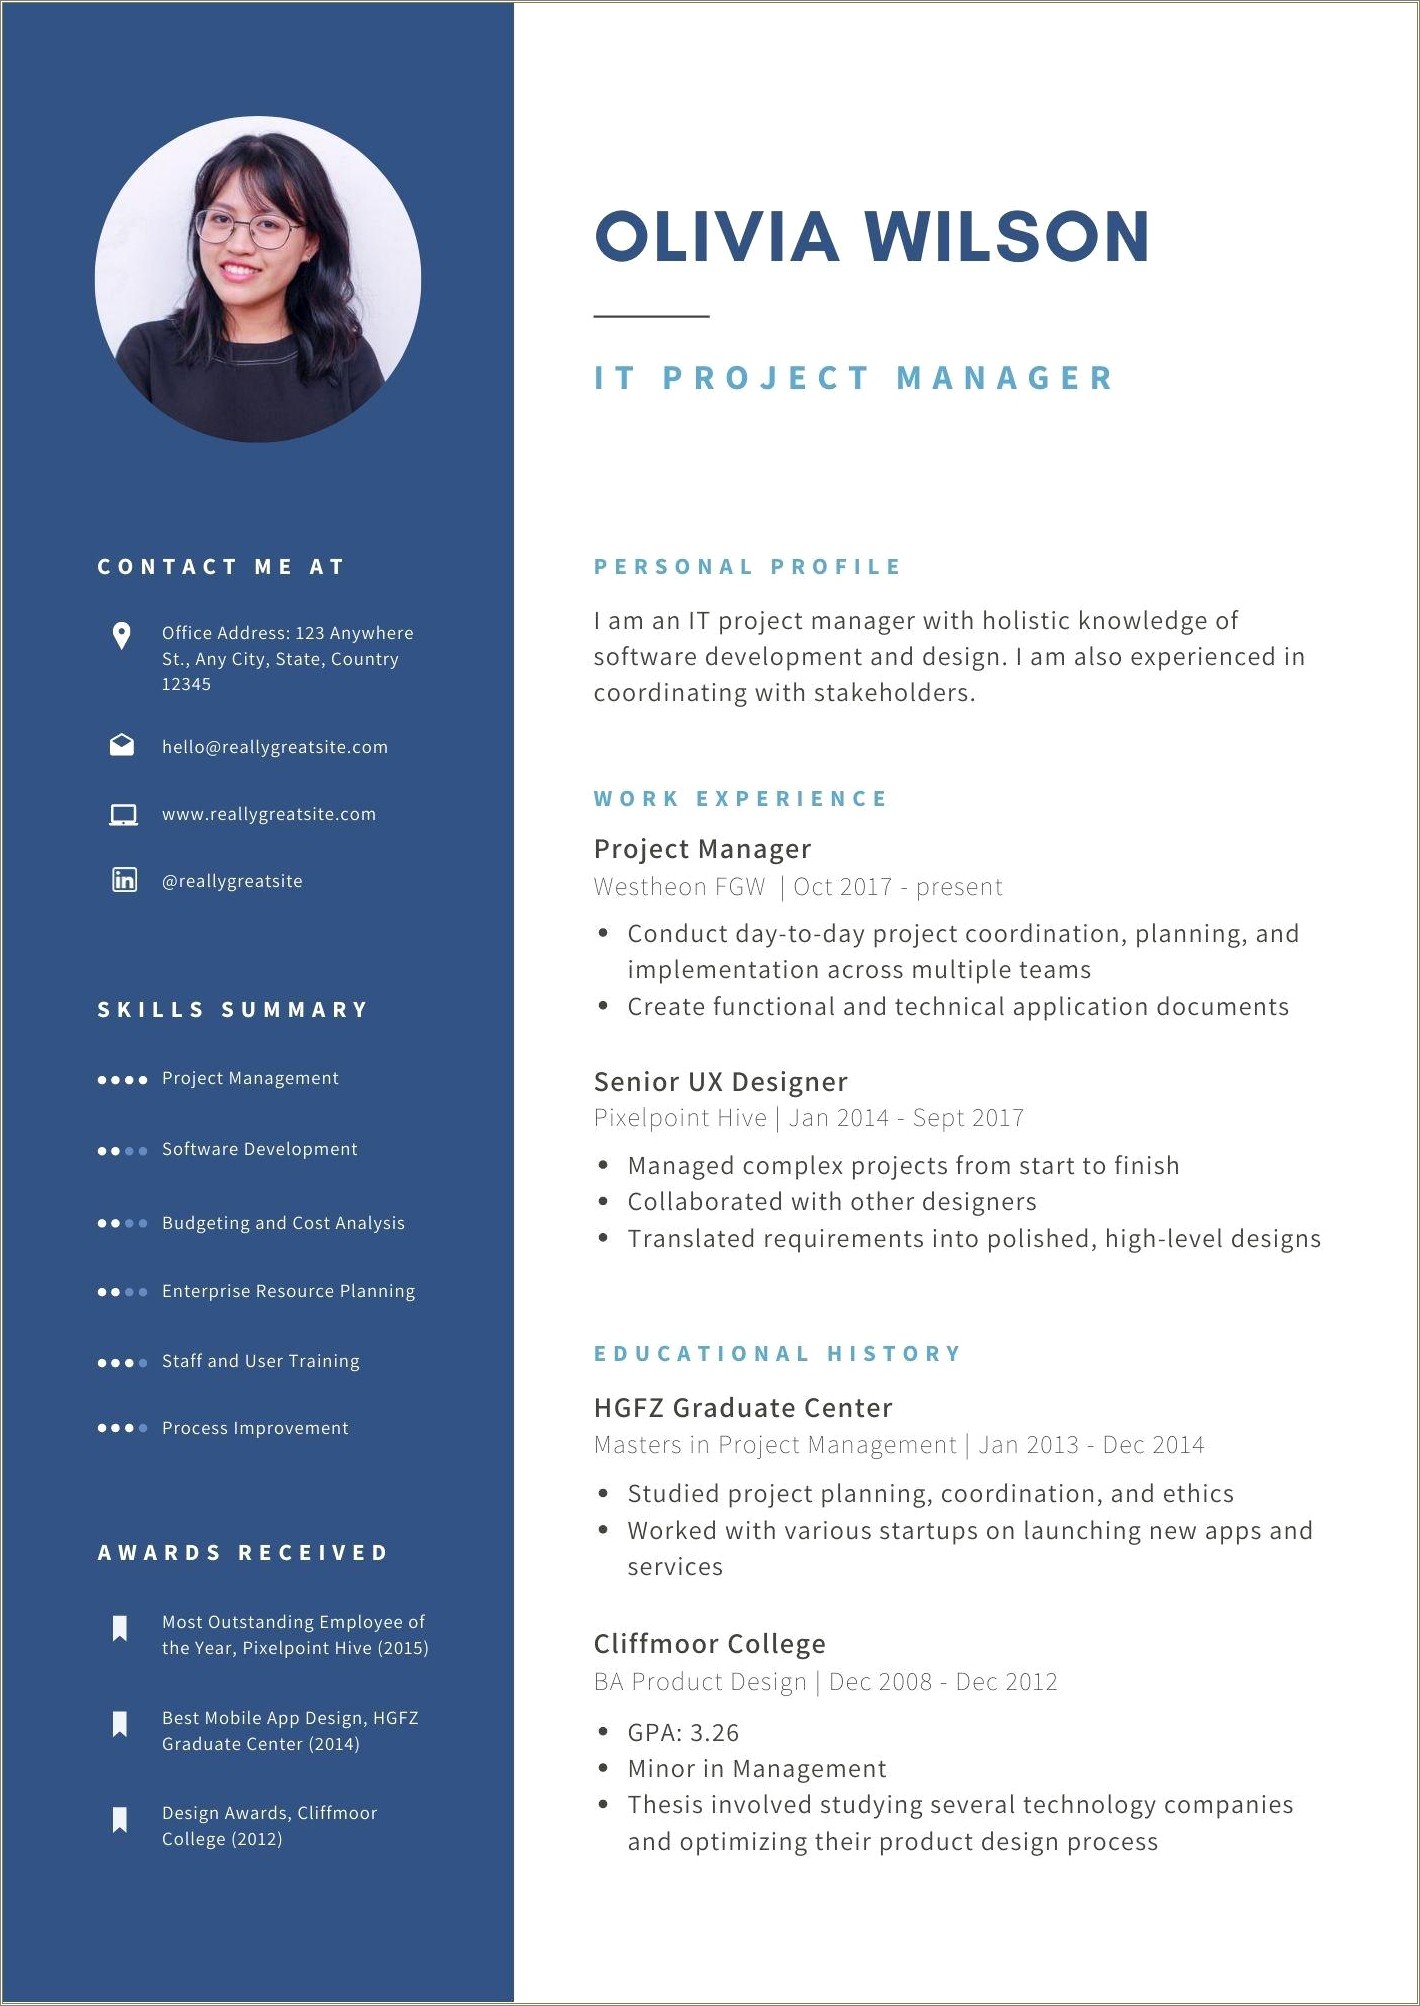 Example Of Applicant Resume For Hrm